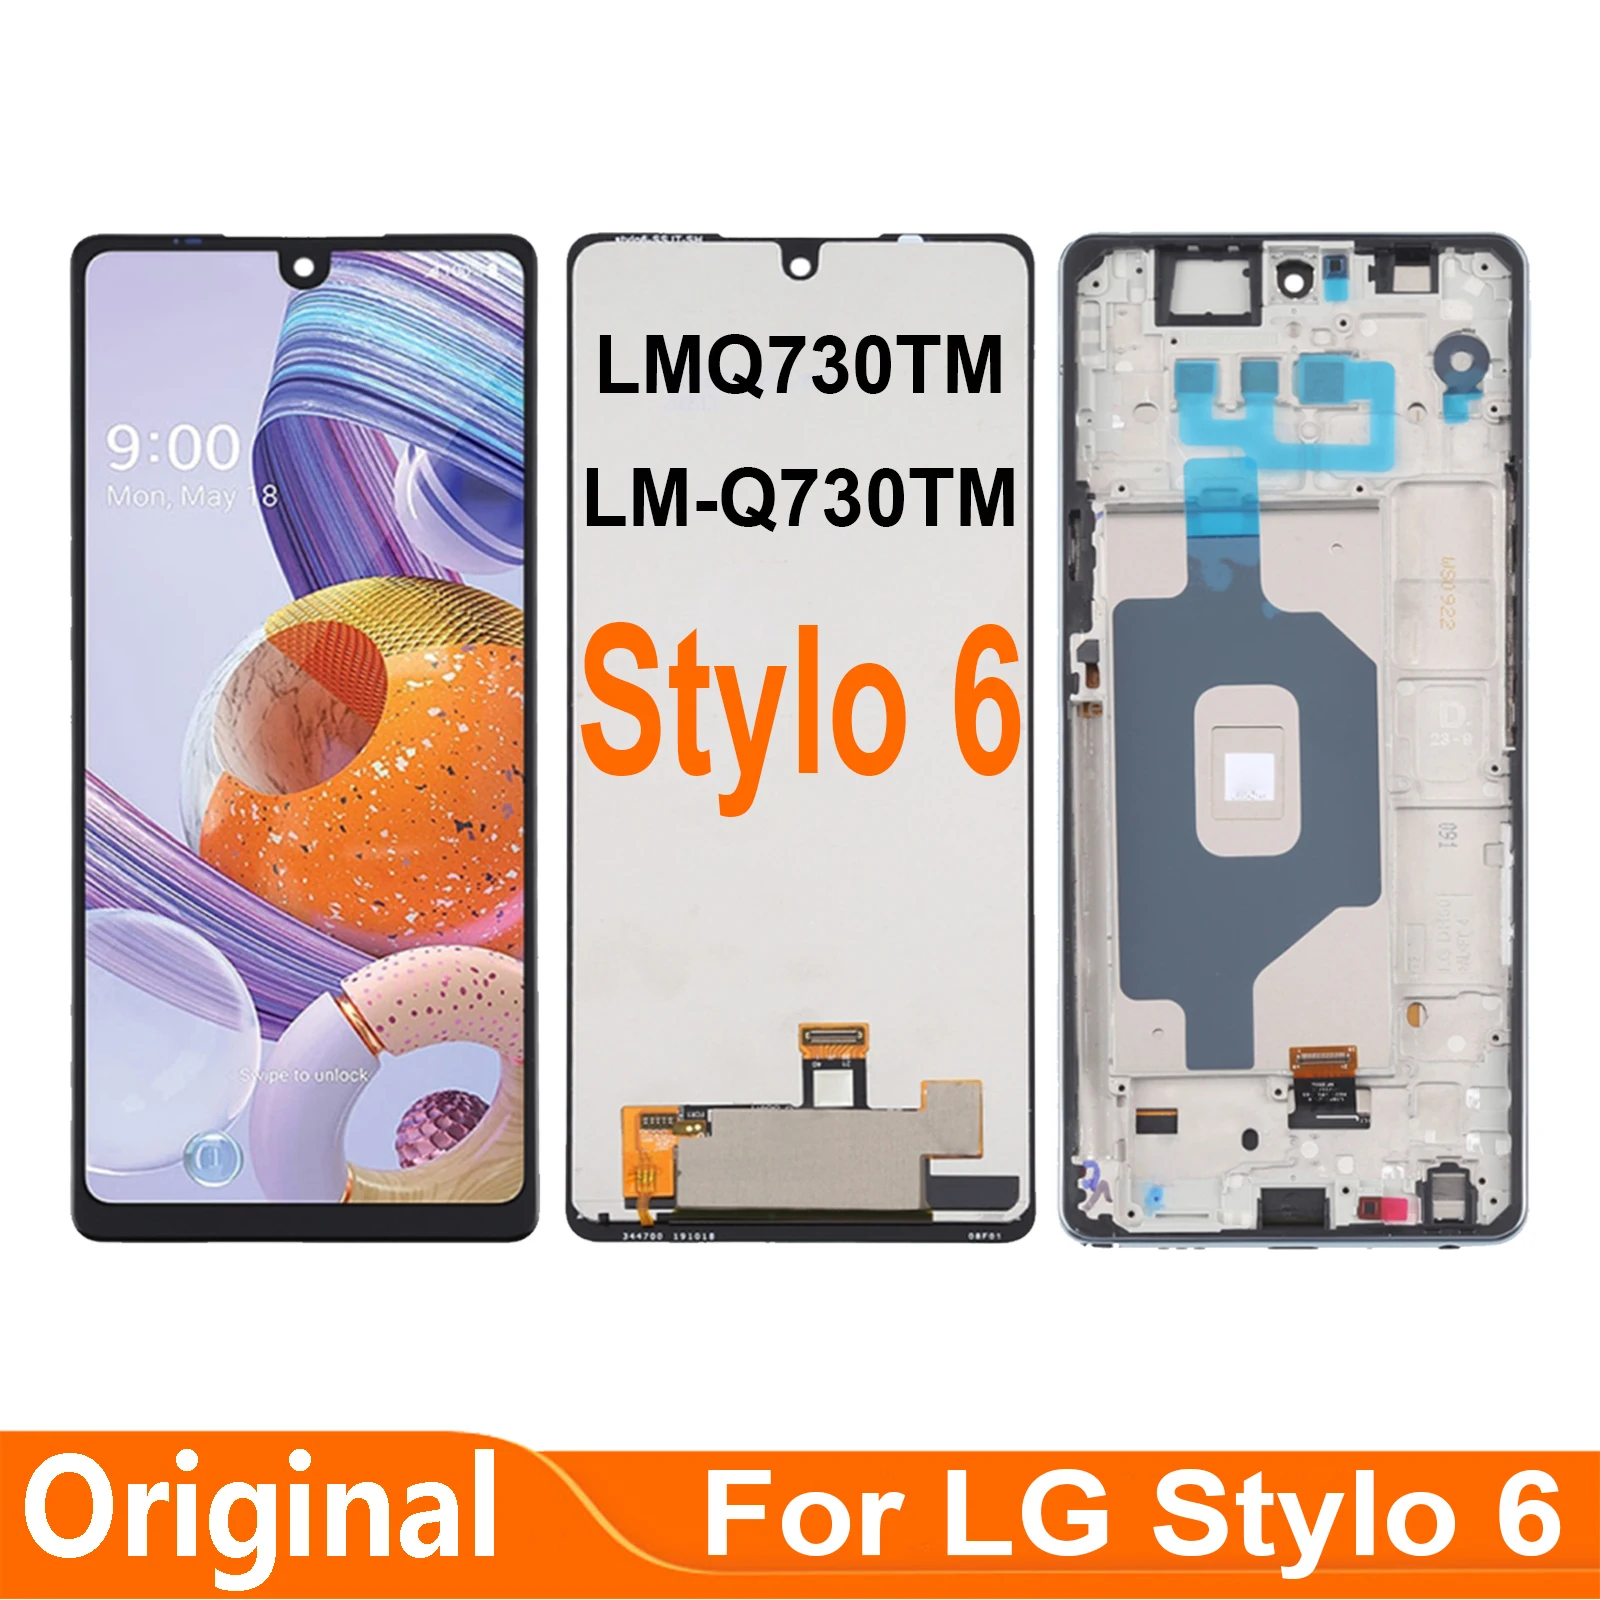 

Original 6.8'' For LG Stylo 6 Stylo6 Q730 LMQ730TM LM-Q730TM LCD Display Touch Screen Digitizer Assembly Repair Parts